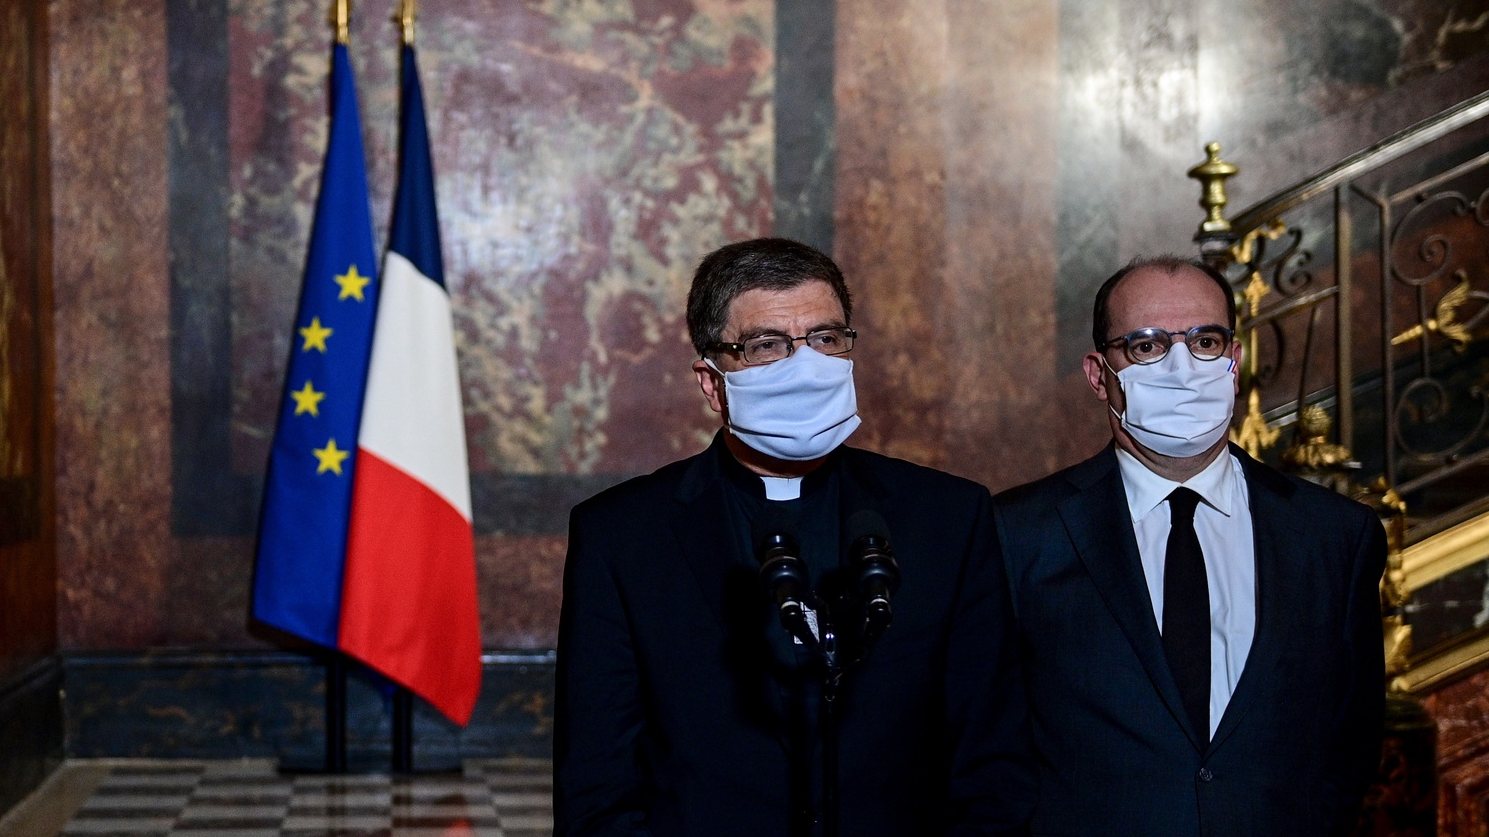 epa08784657 (From L) Archbishop of Paris Michel Aupetit, President of Bishops&#039; Conference of France Eric de Moulins-Beaufort and French Prime Minister Jean Castex talk to the press after their meeting at the Matignon Hotel in Paris, France on 29 October 2020, after a man wielding a knife killed three people in the Basilica of Notre-Dame in the heart of the Mediterranean city of Nice. Three people have died in what officials are treating as a terror attack. The attack comes less than a month after the beheading of a French middle school teacher in Paris on 16 October.  EPA/MARTIN BUREAU / POOL  MAXPPP OUT